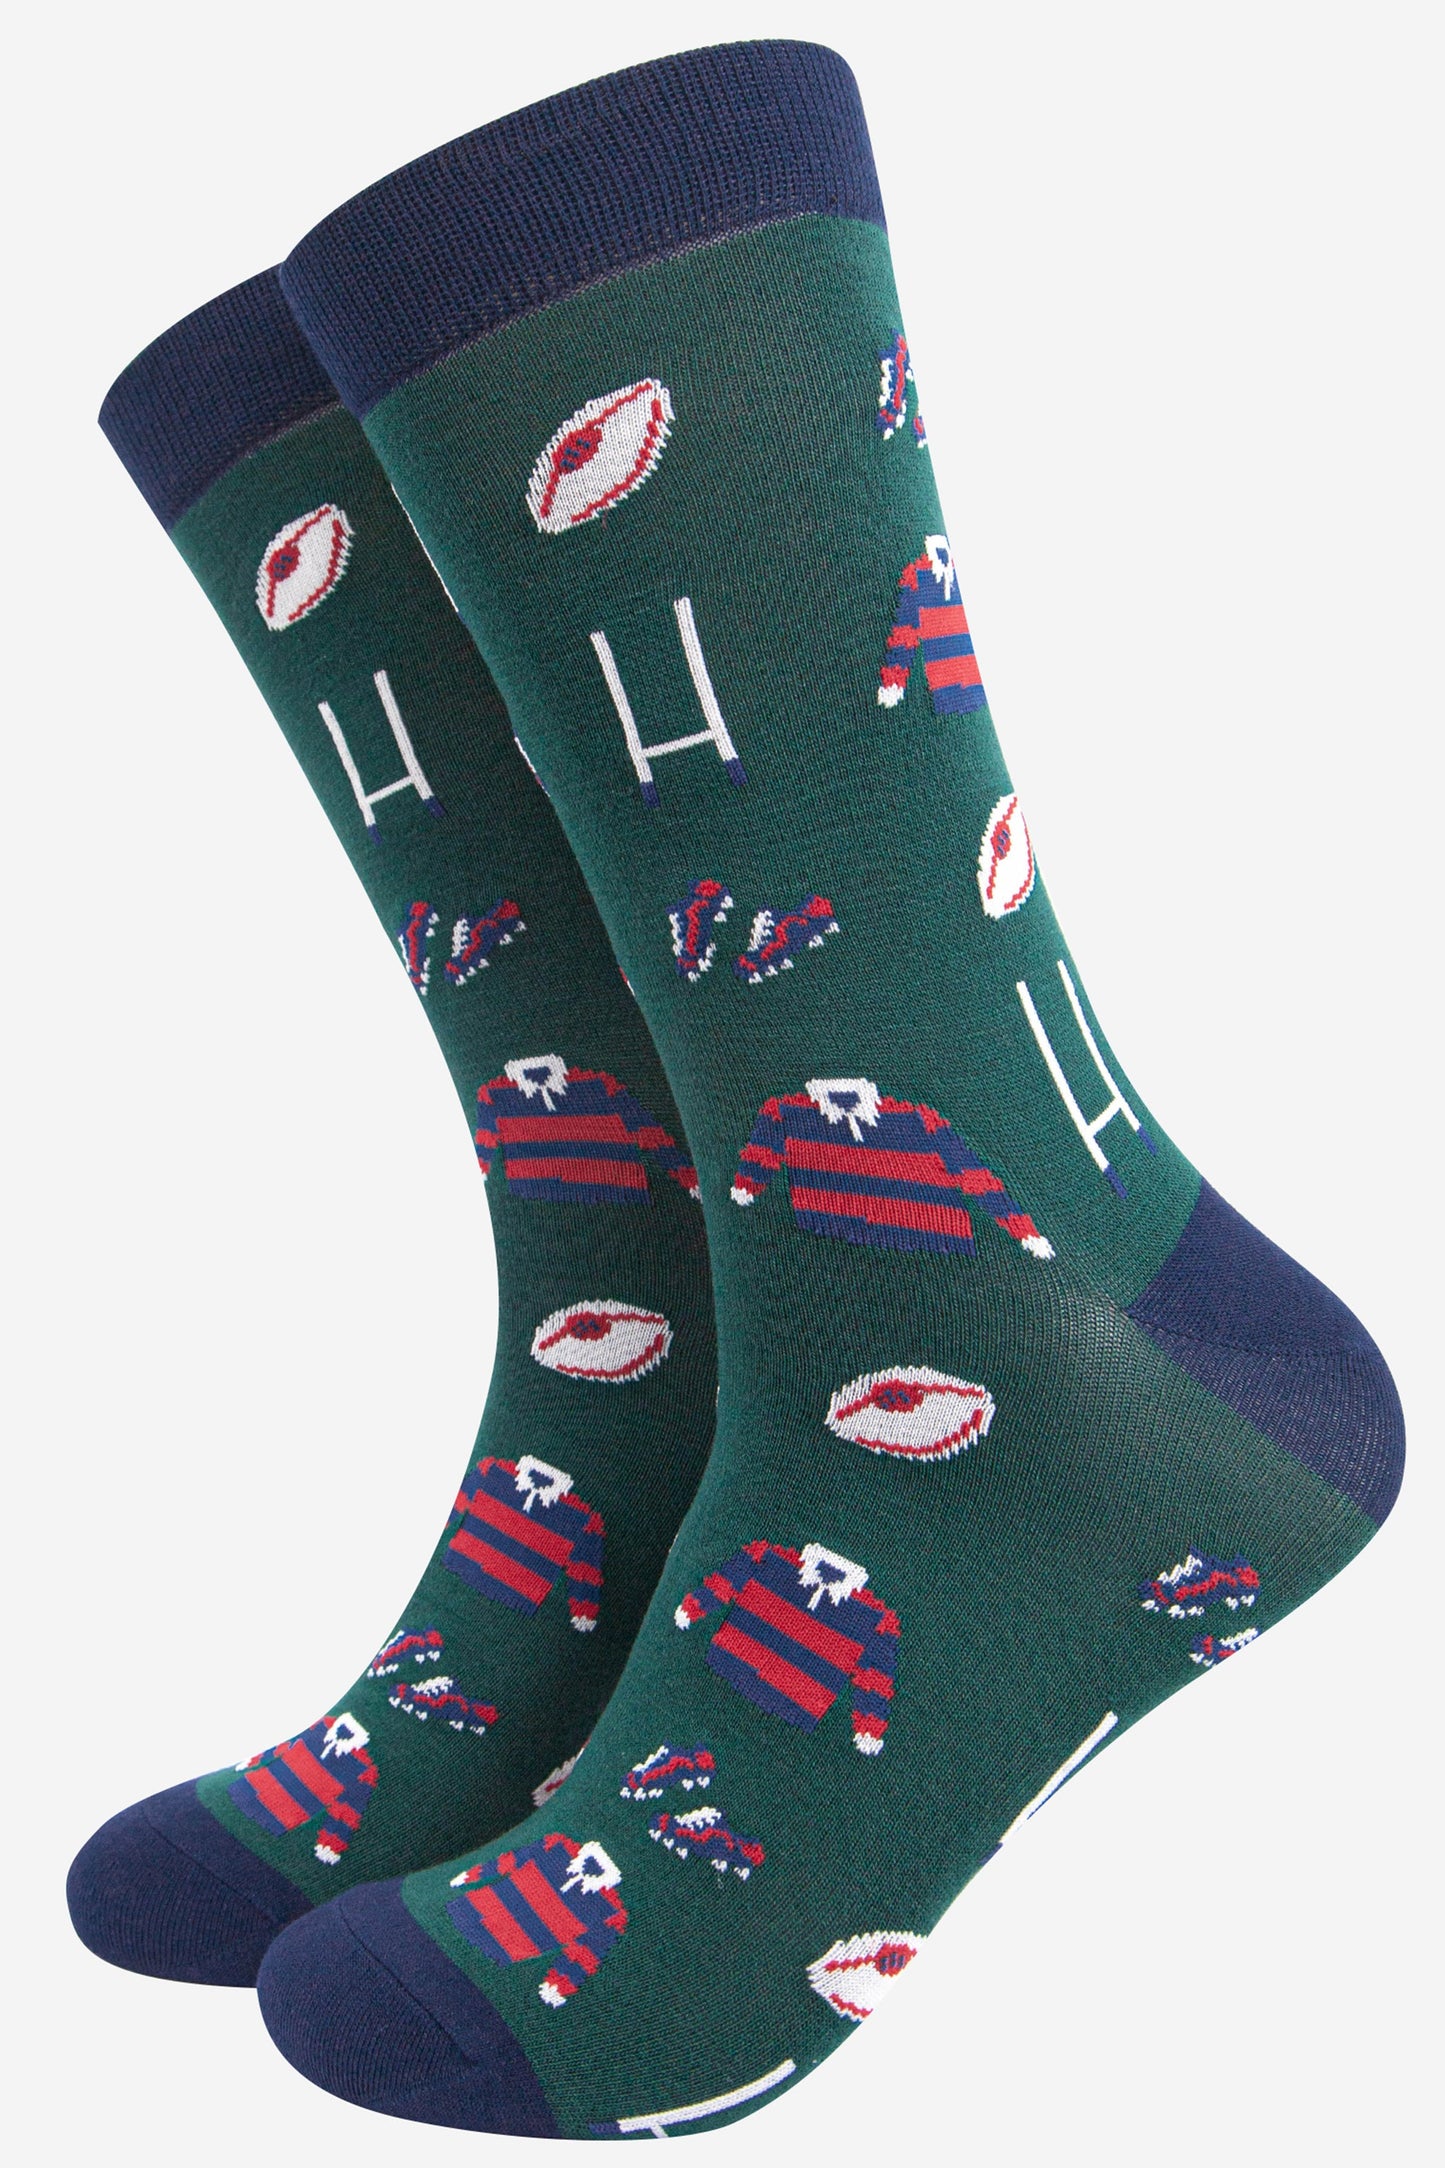 mens green rugby themed novelty dress socks featruing a red and blue rugby team kit , rugby ball and rugby goal posts